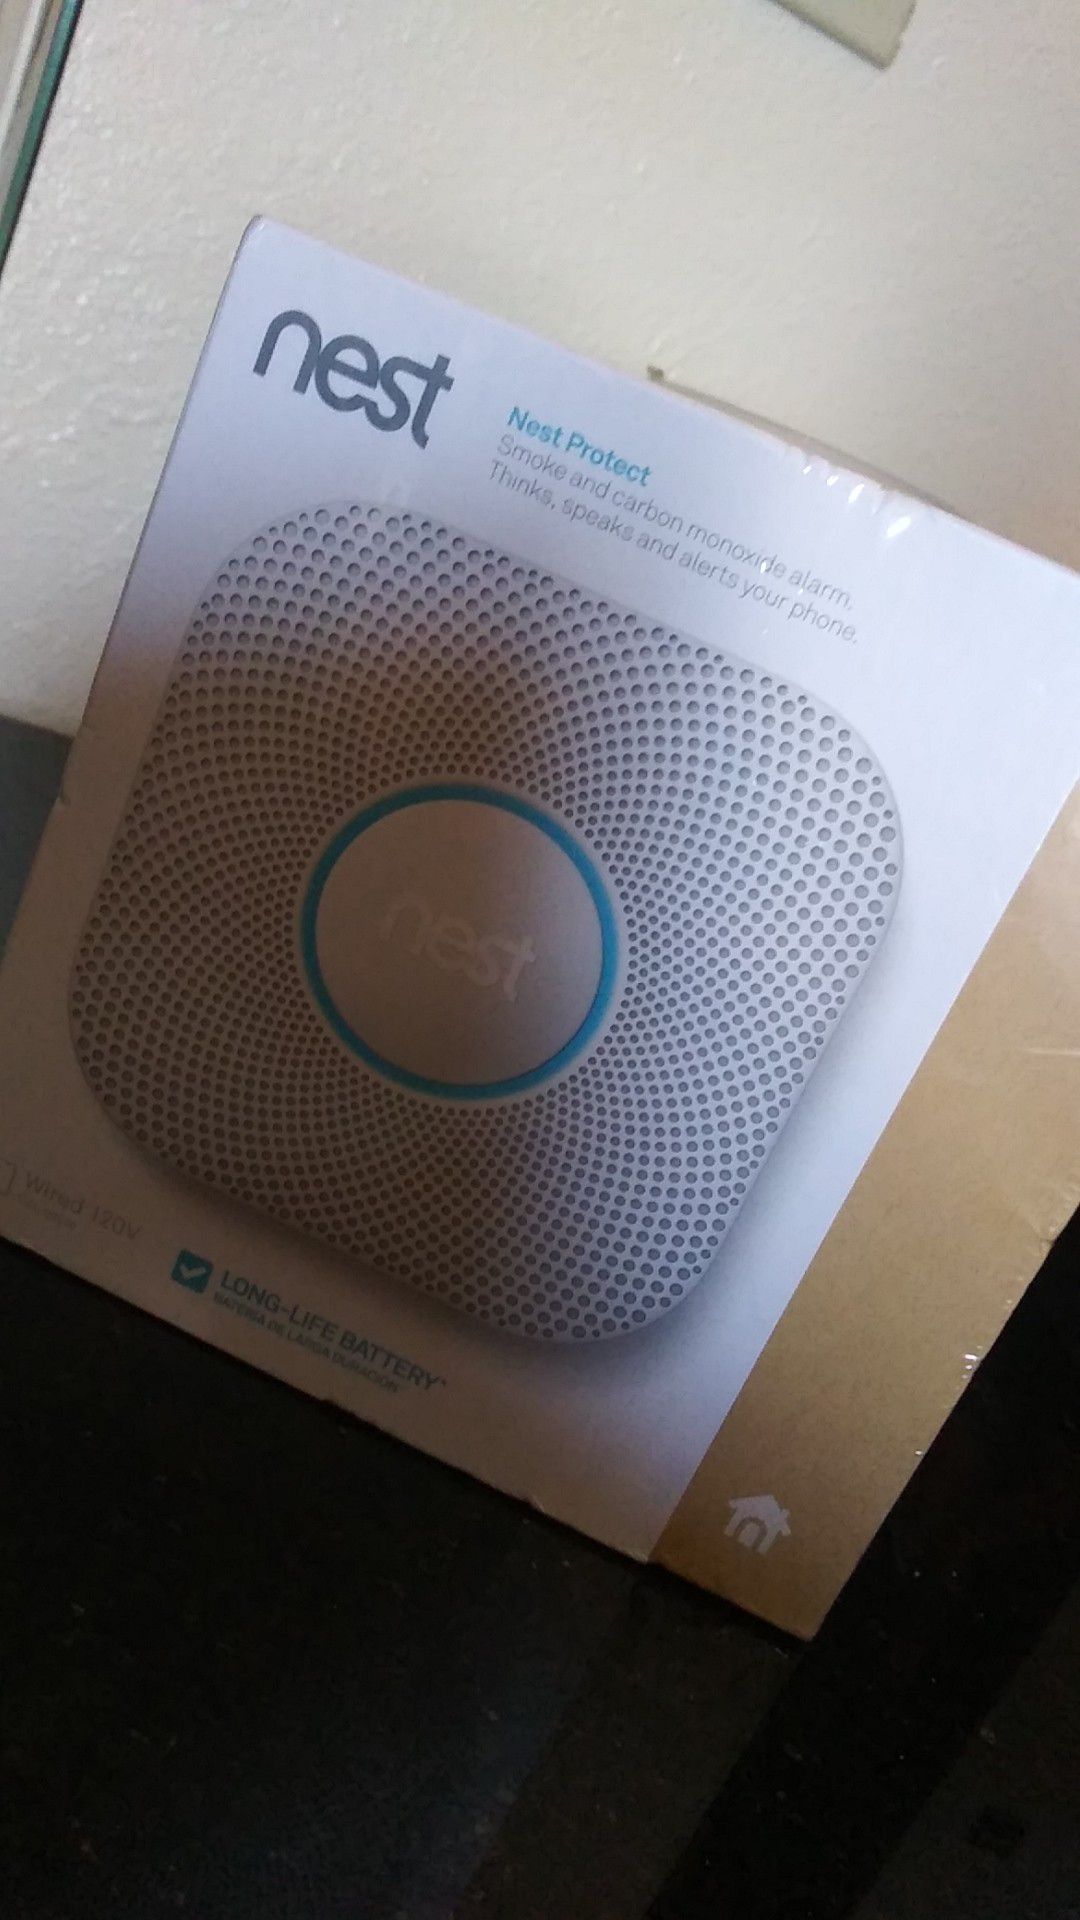 Nest protect. Brand new